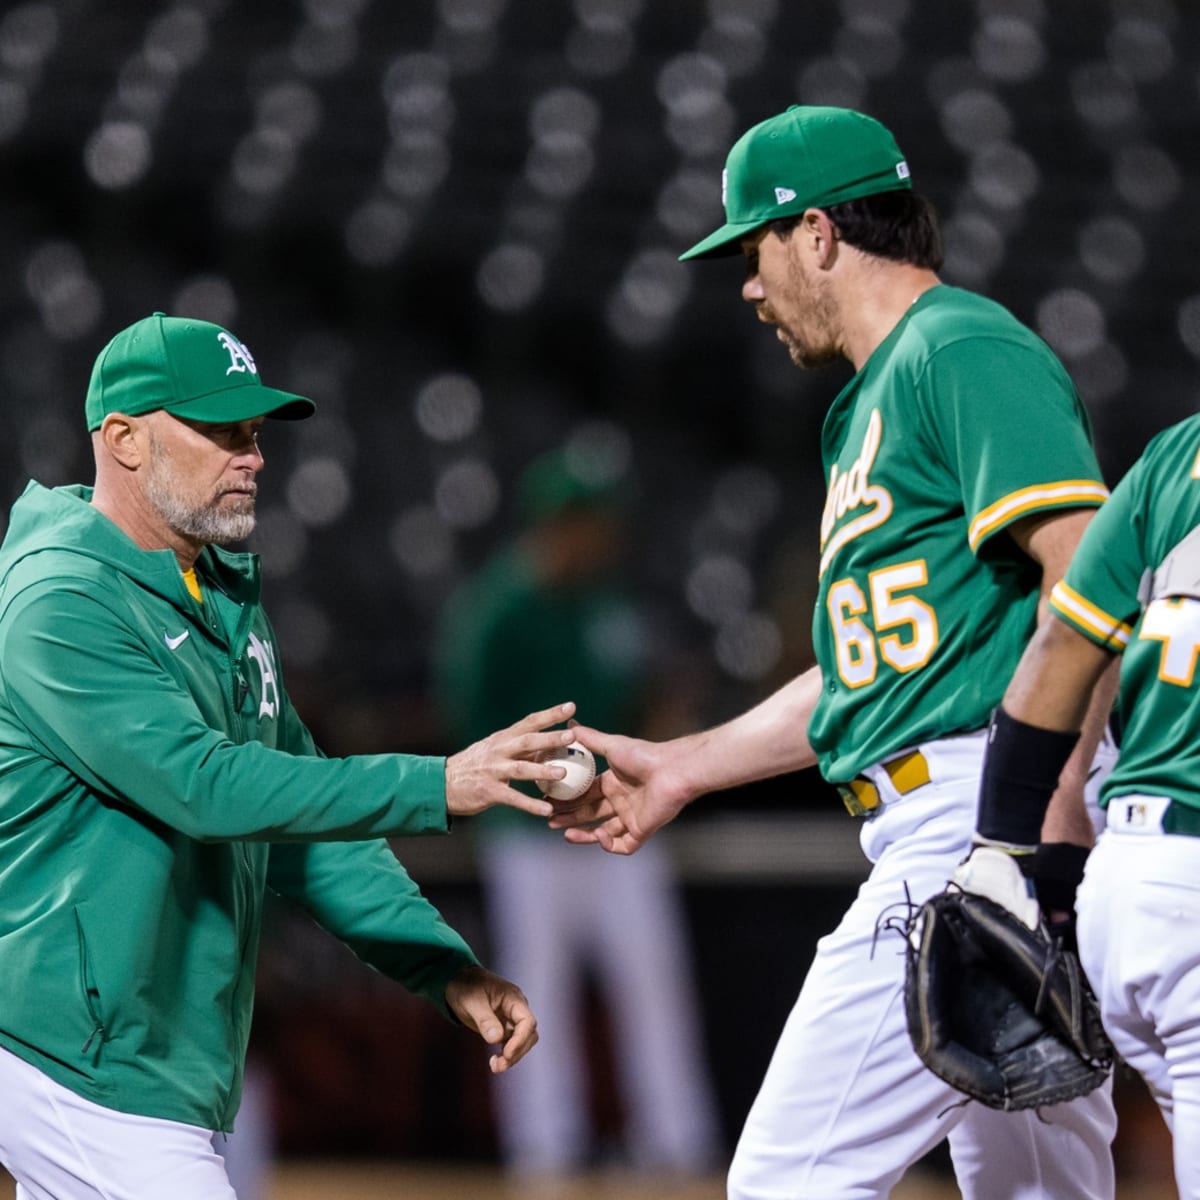 The Oakland Athletics are on pace to make some truly bad history